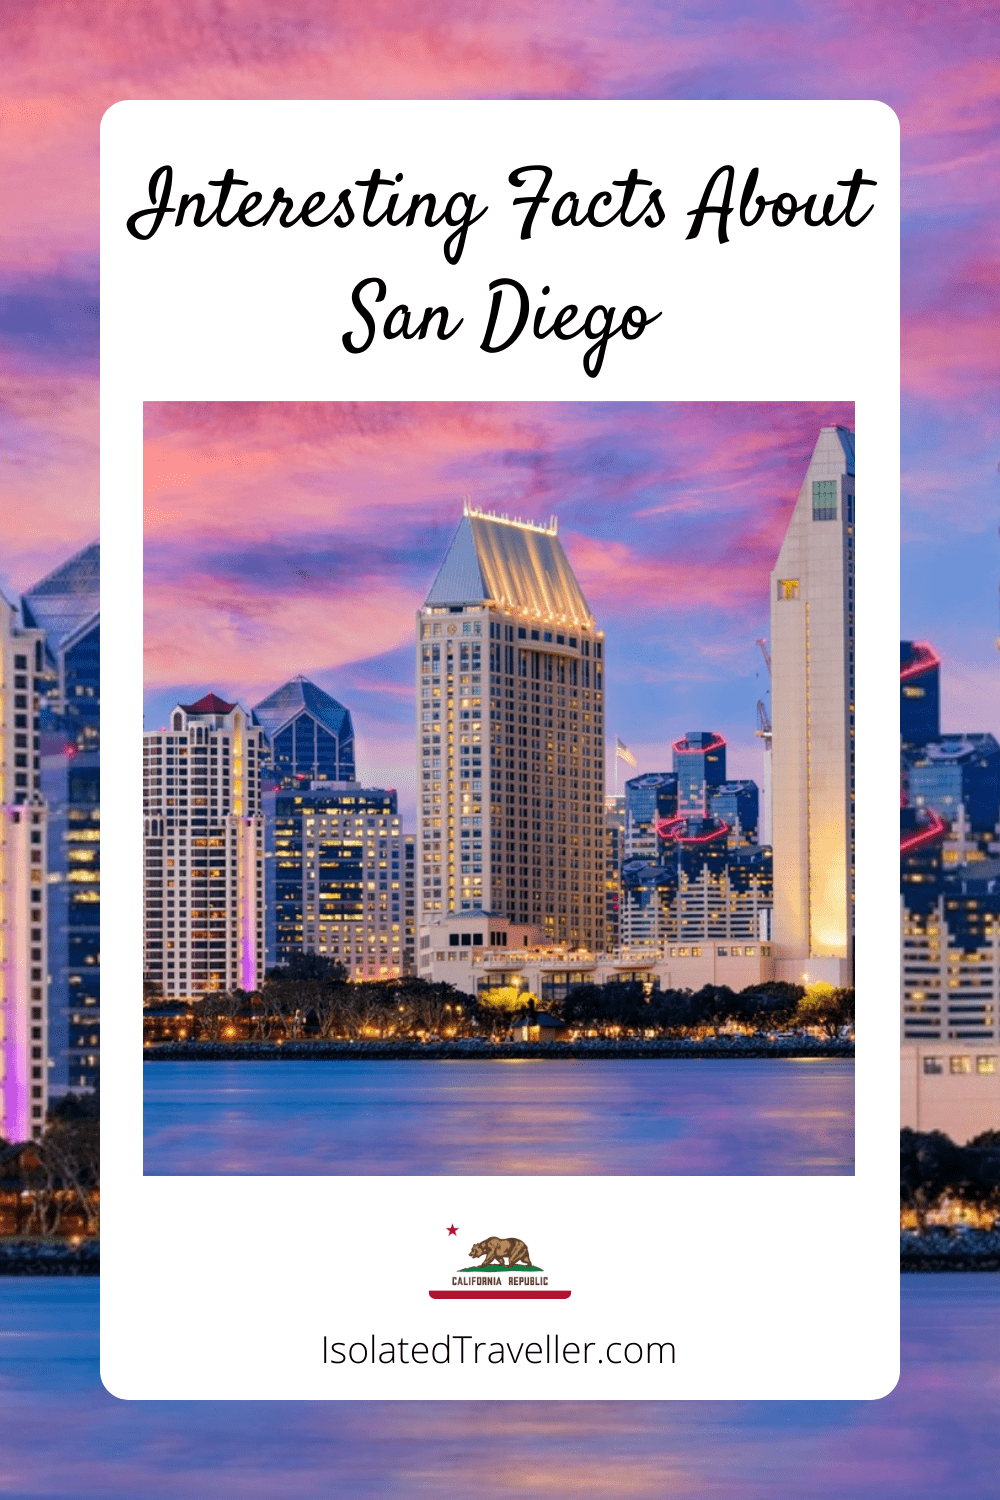 Facts About San Diego